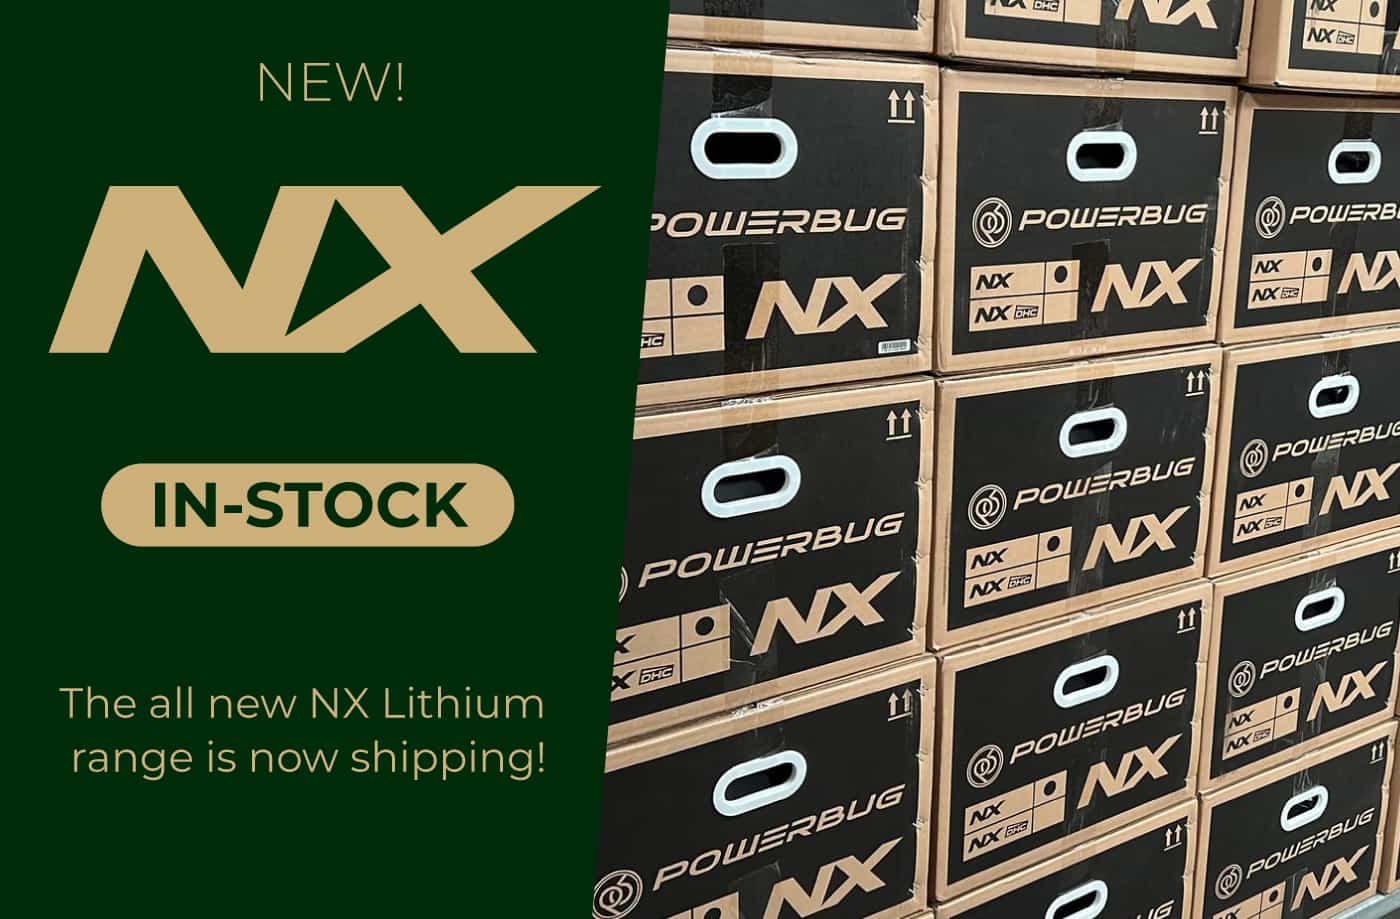 Now available! The all new NX Lithium range